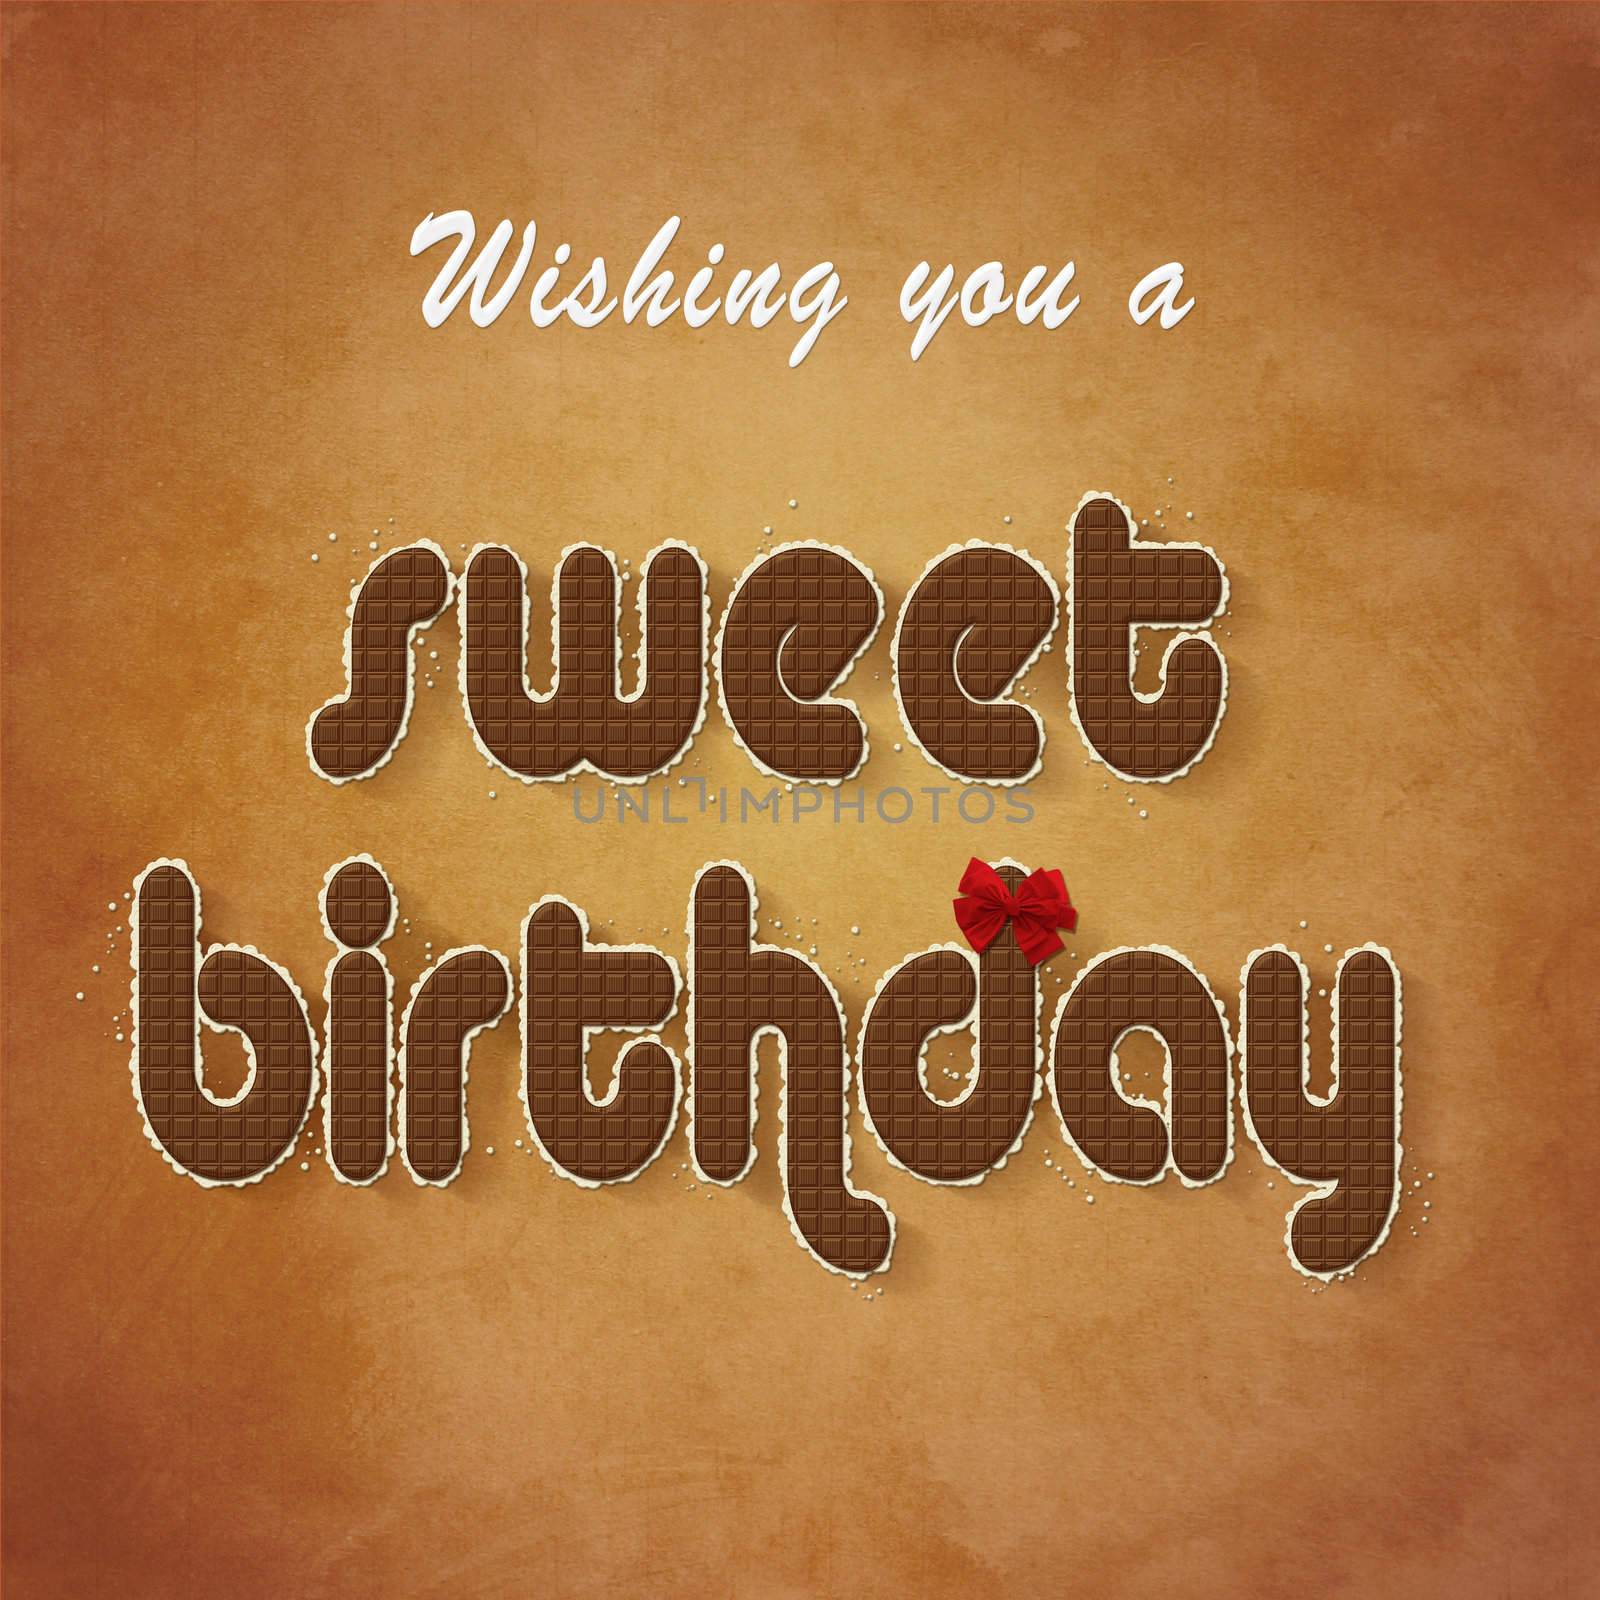 A chocolate birthday greeting with a red bow on a grunge background.